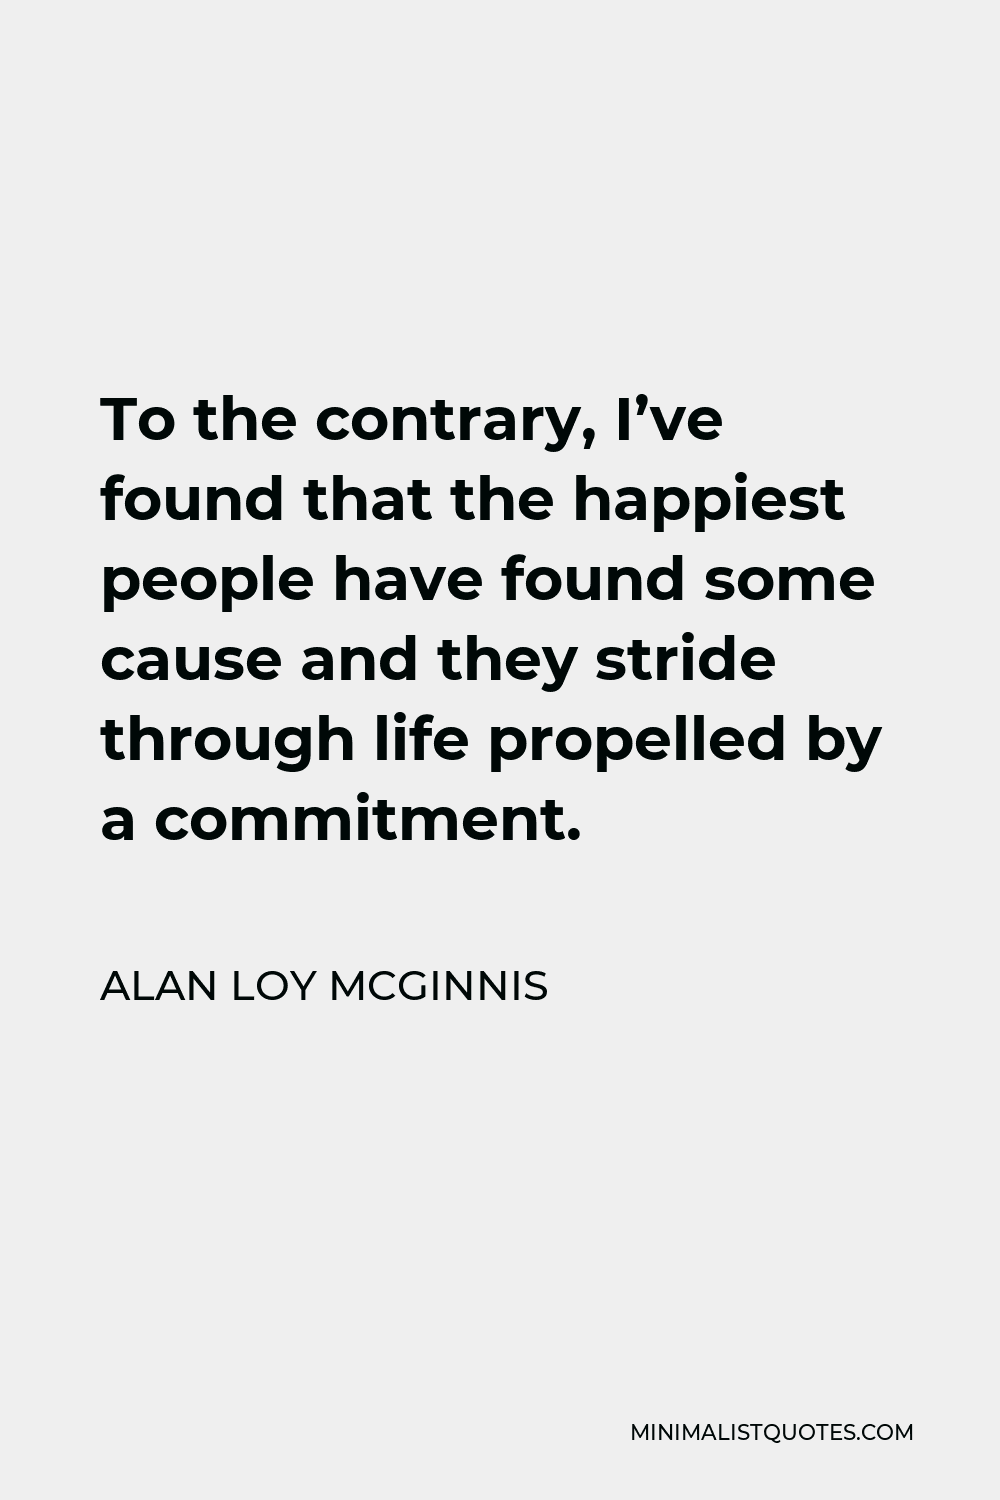 Alan Loy McGinnis Quote - To the contrary, I’ve found that the happiest people have found some cause and they stride through life propelled by a commitment.